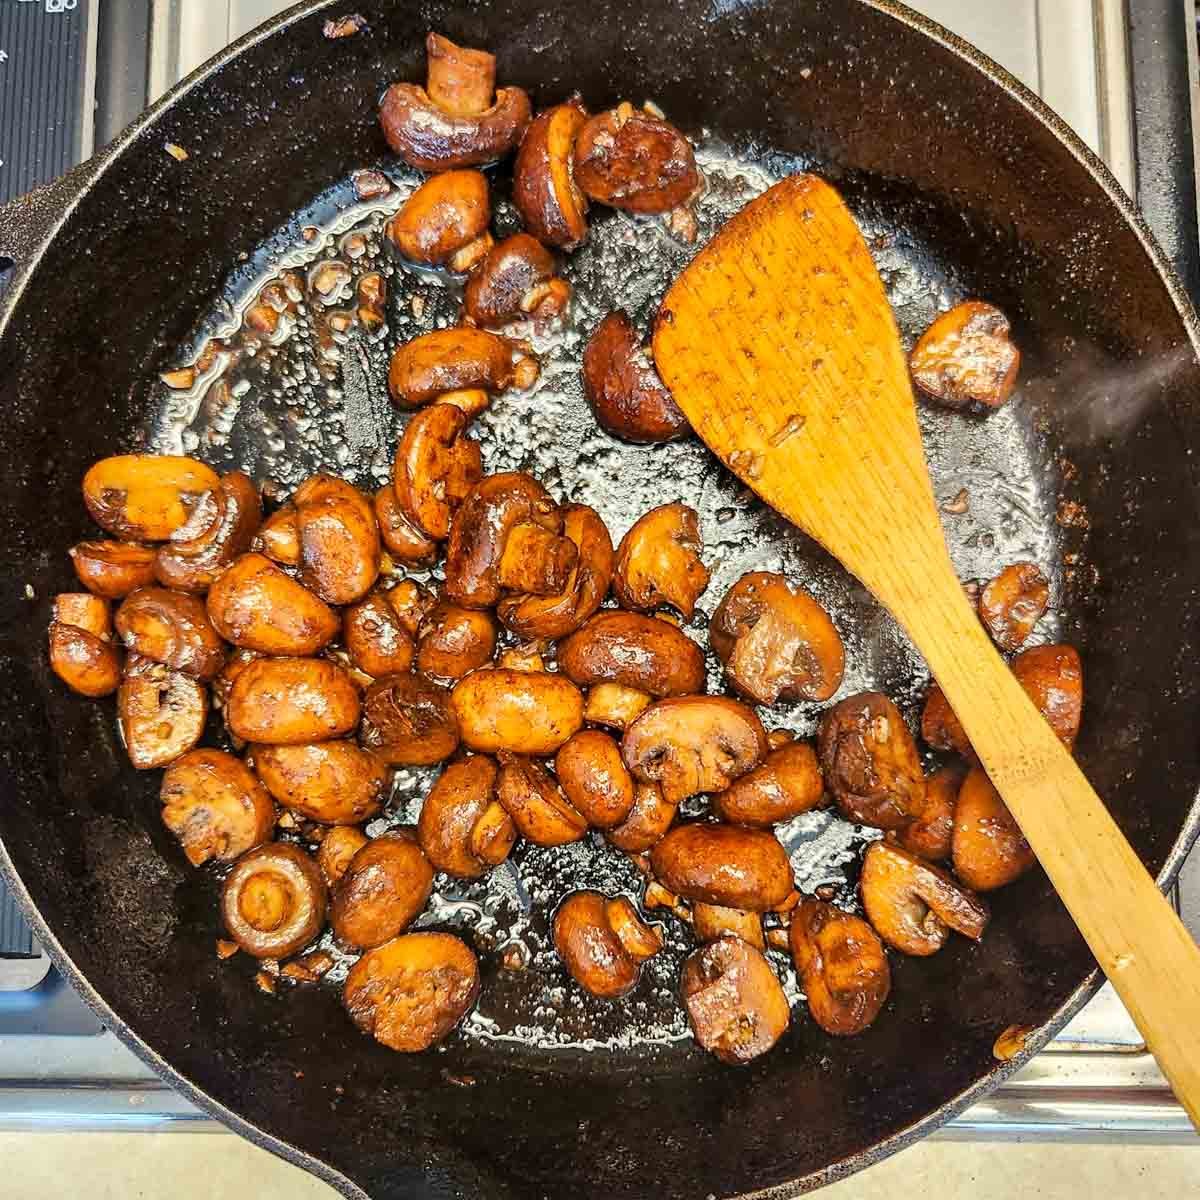 Steakhouse mushrooms in a cast iron skillet with a wooden spoon